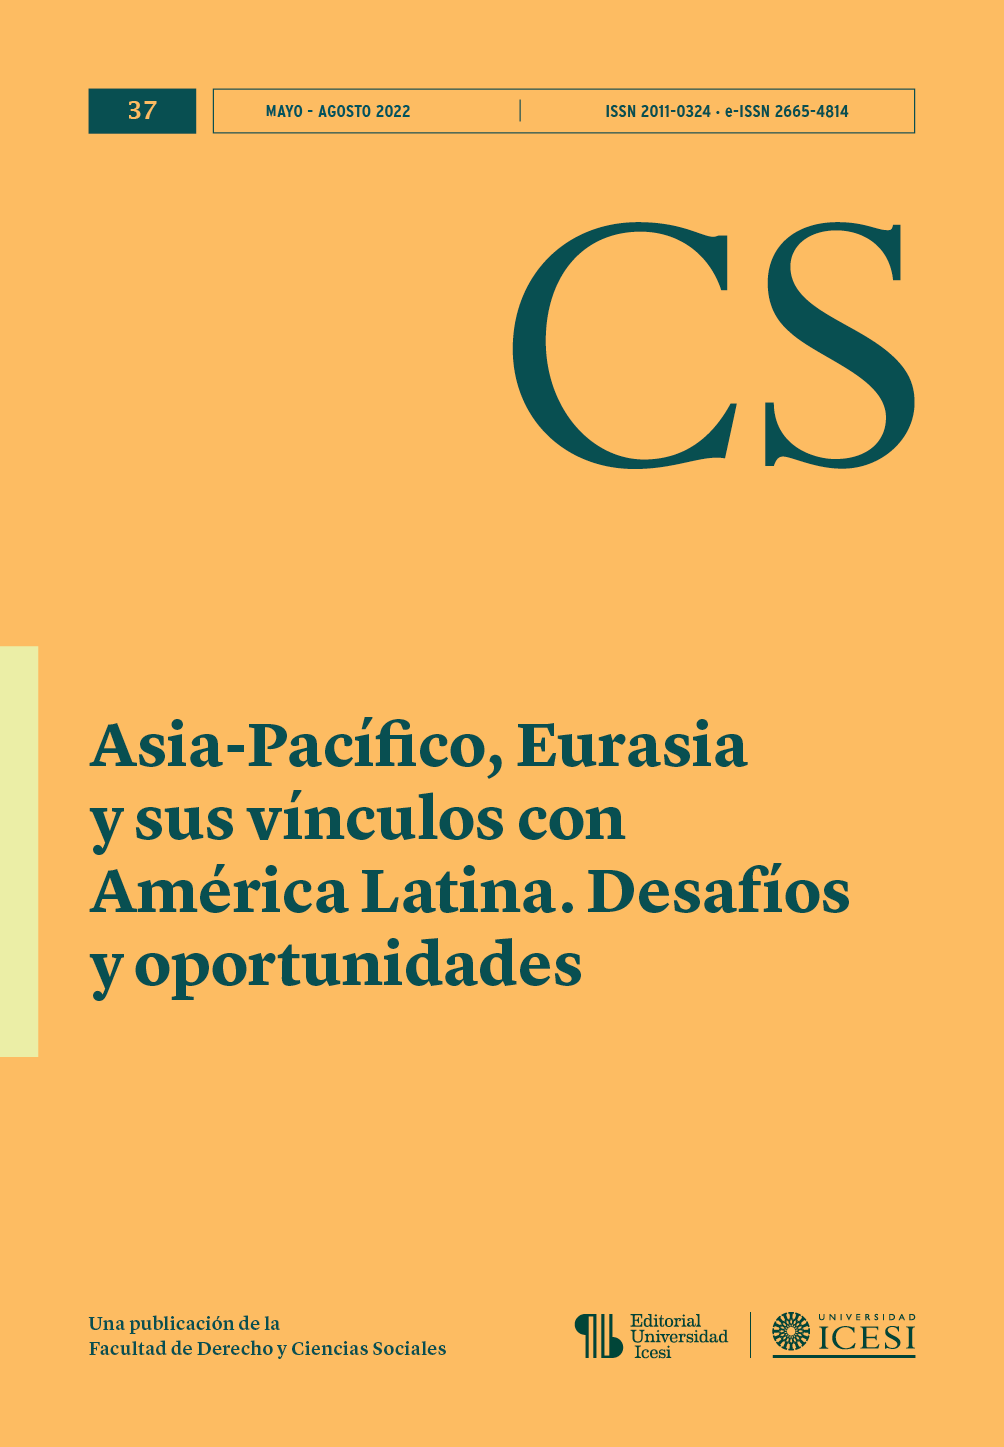 					View No. 37 (2022): No. 37, May-August (2022): Latin America and Asia-Pacific, Eurasia: Challenges and Opportunities
				